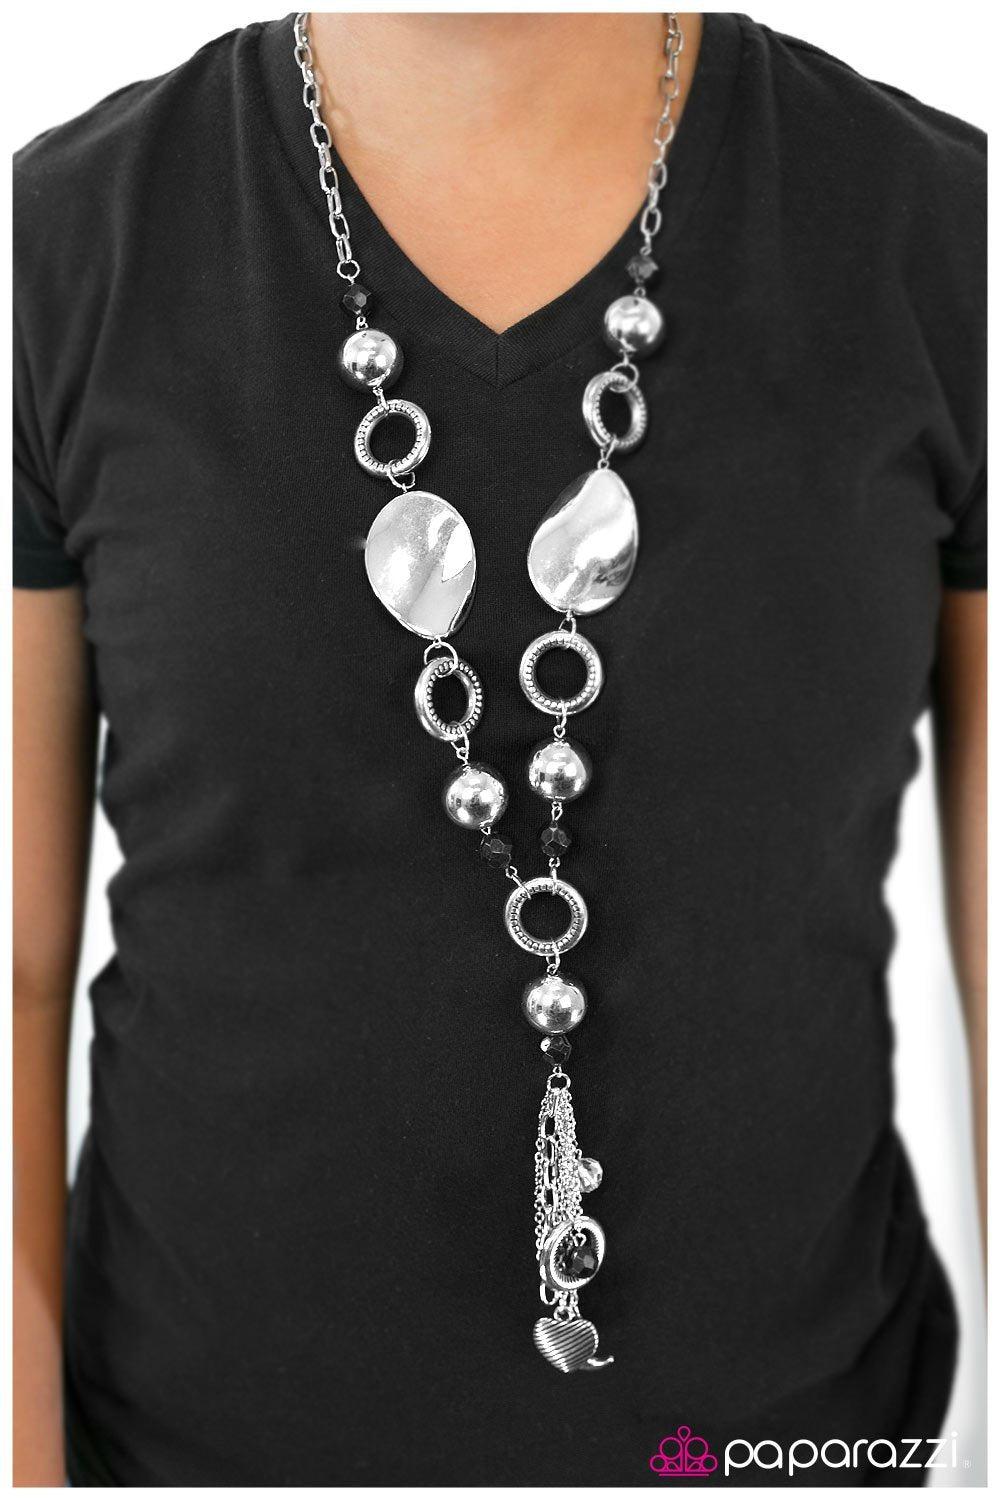 Total Eclipse of the Heart Long Silver Tassel Necklace and matching Earrings - Paparazzi Accessories - model -CarasShop.com - $5 Jewelry by Cara Jewels